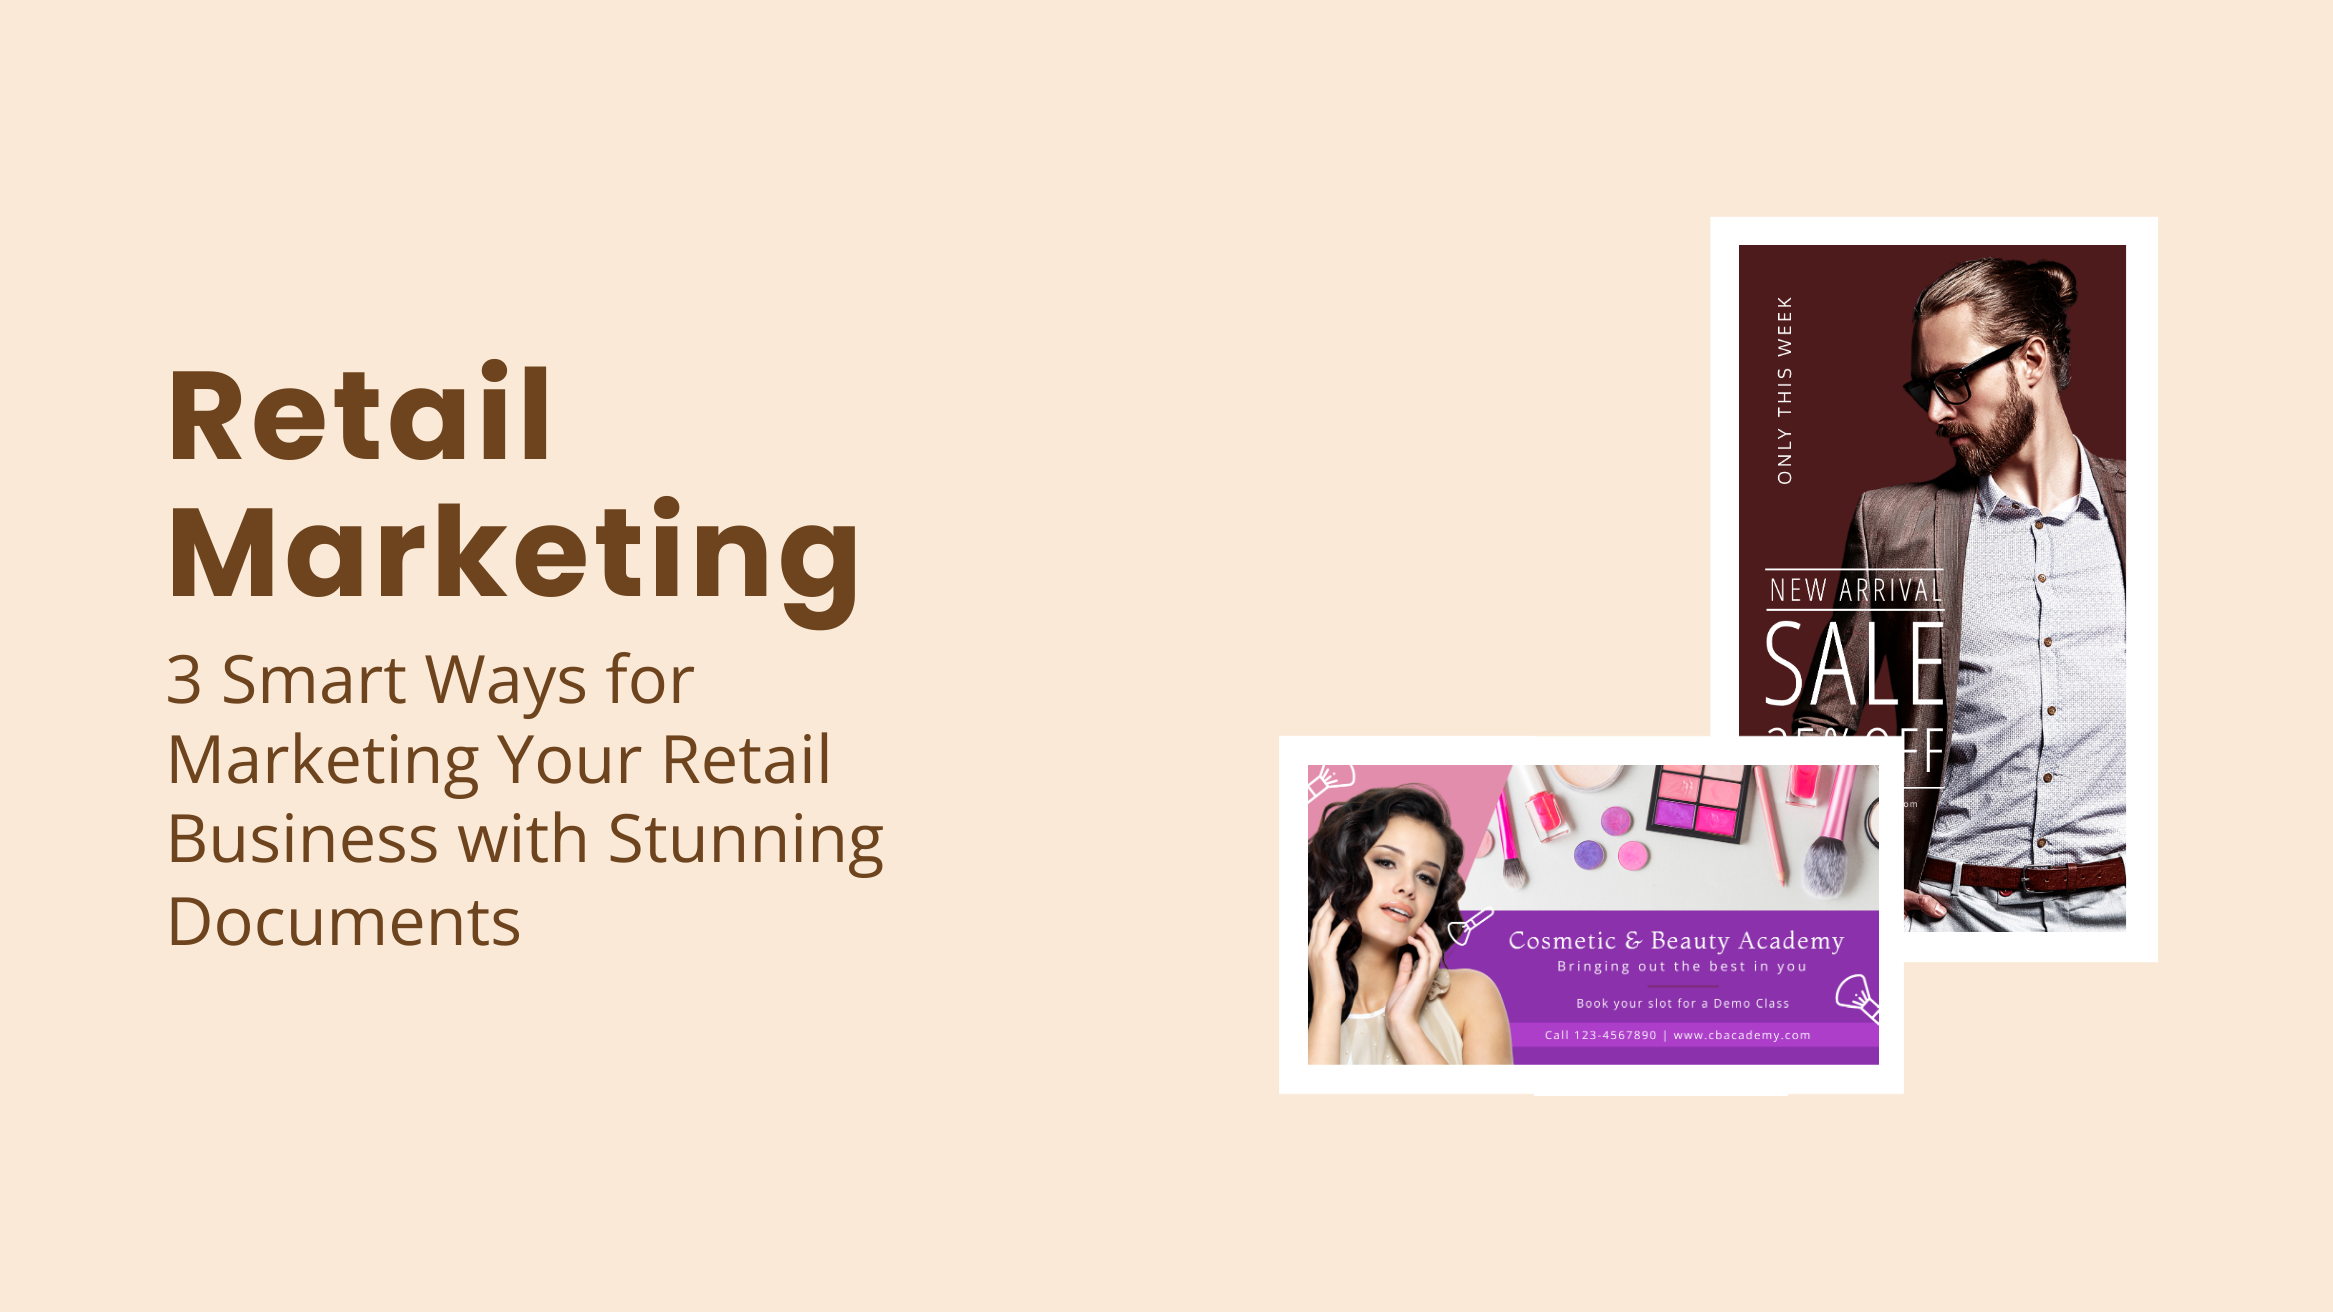 Retail Marketing 3 Smart Ways for Marketing Your Retail Business with Stunning Documents